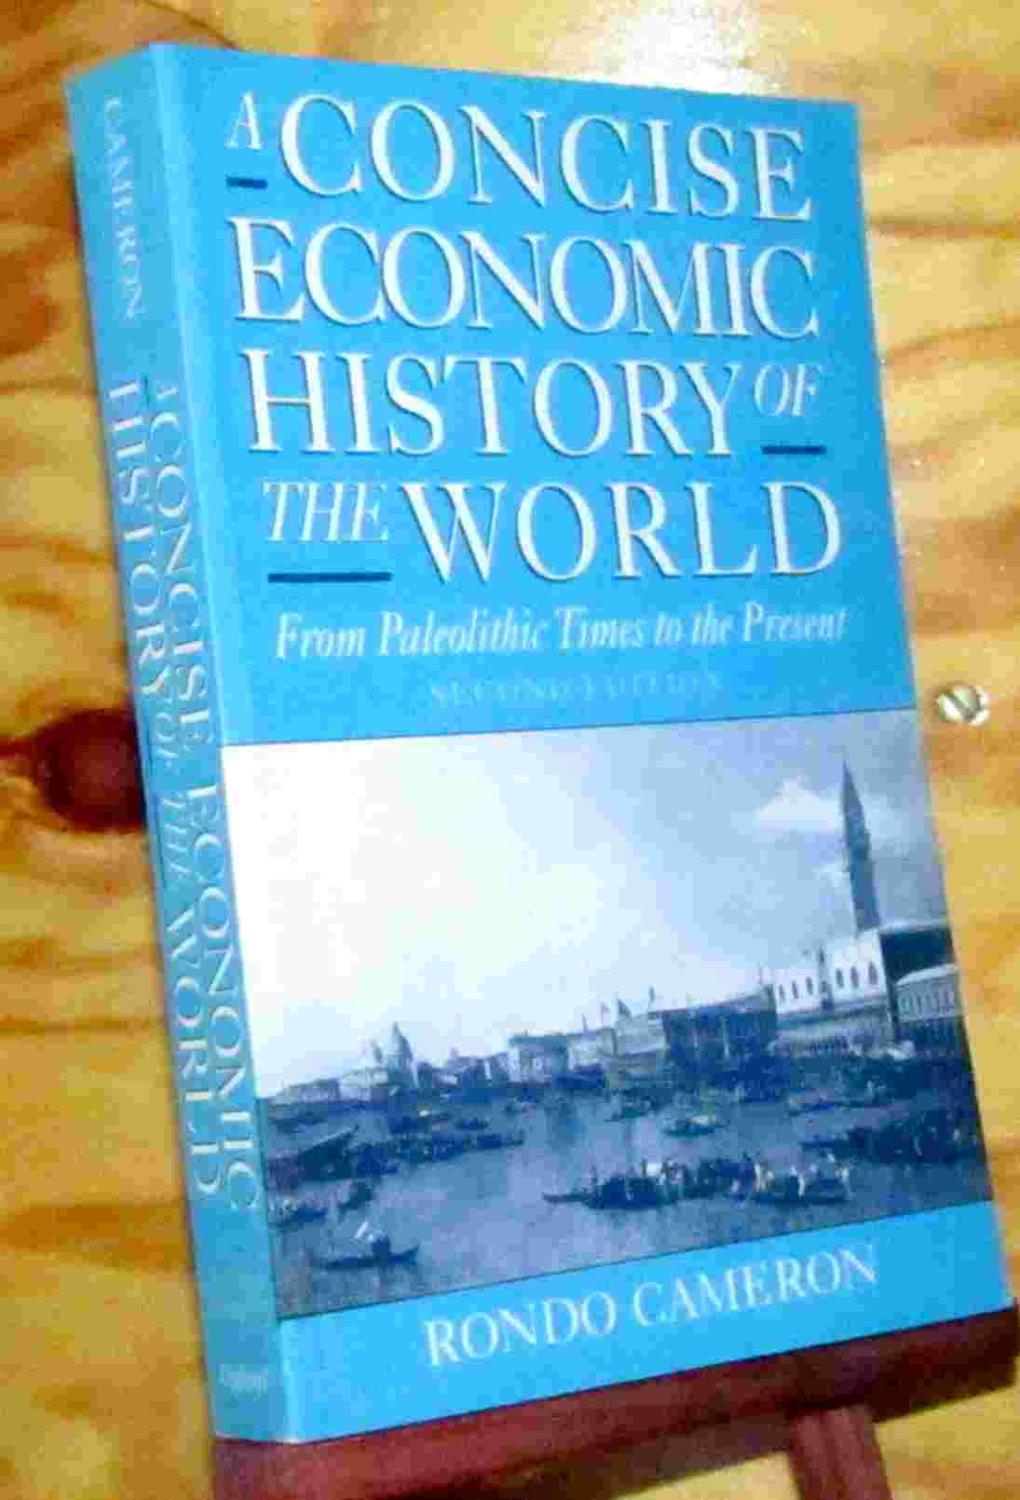 A CONCISE ECONOMIC HISTORY OF THE WORLD FROM PALEOLITHIC TIMES TO THE PRESENT - CAMERON Rondo